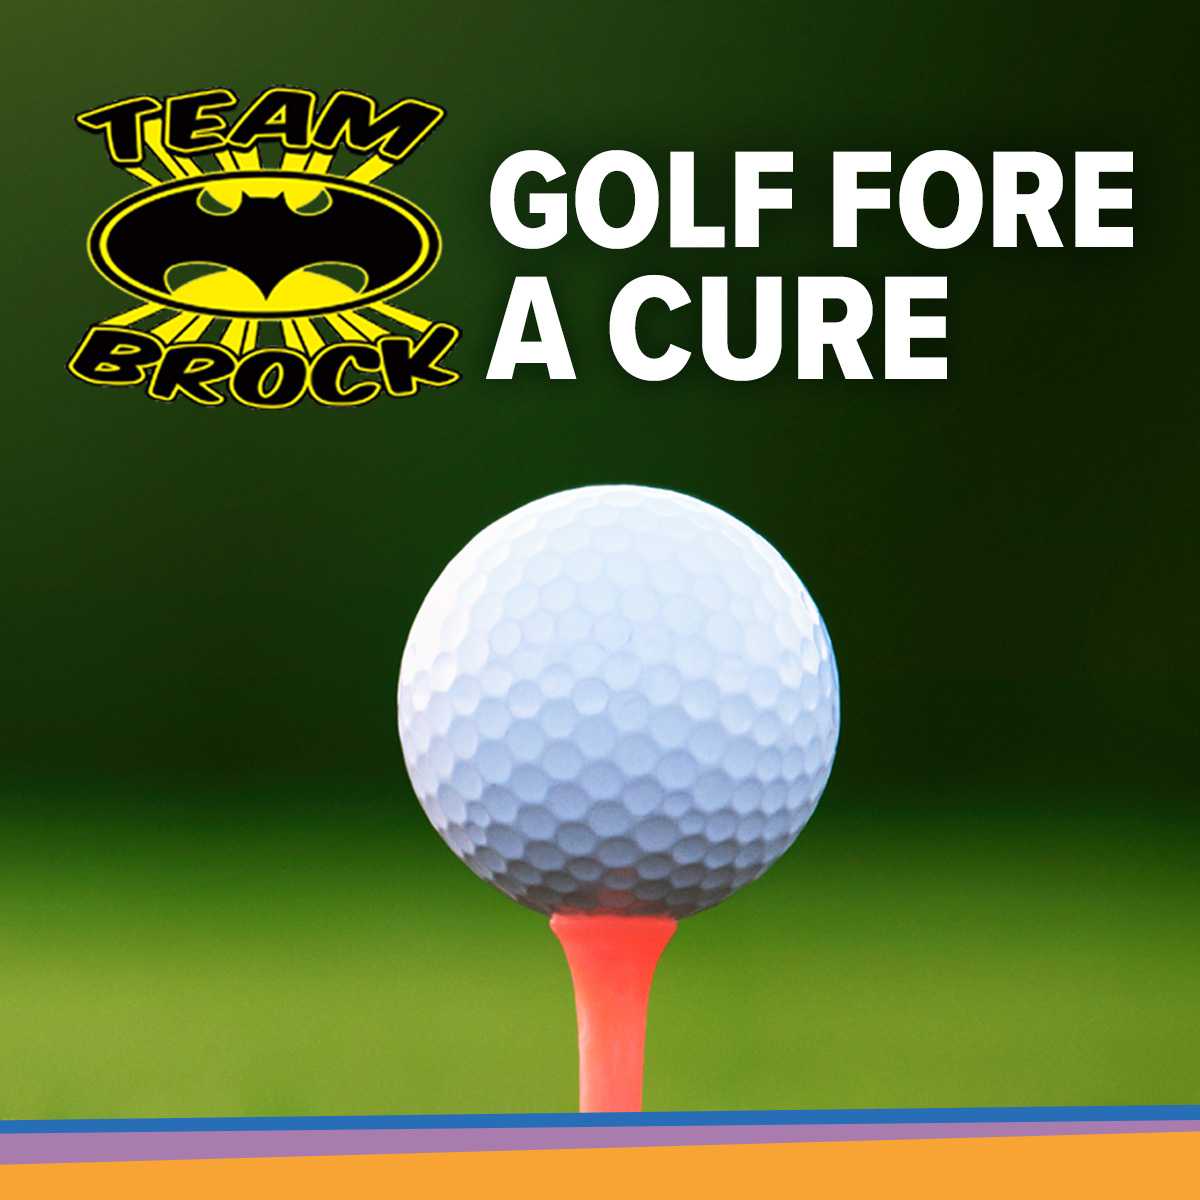 Team Brock Golf Fore A Cure